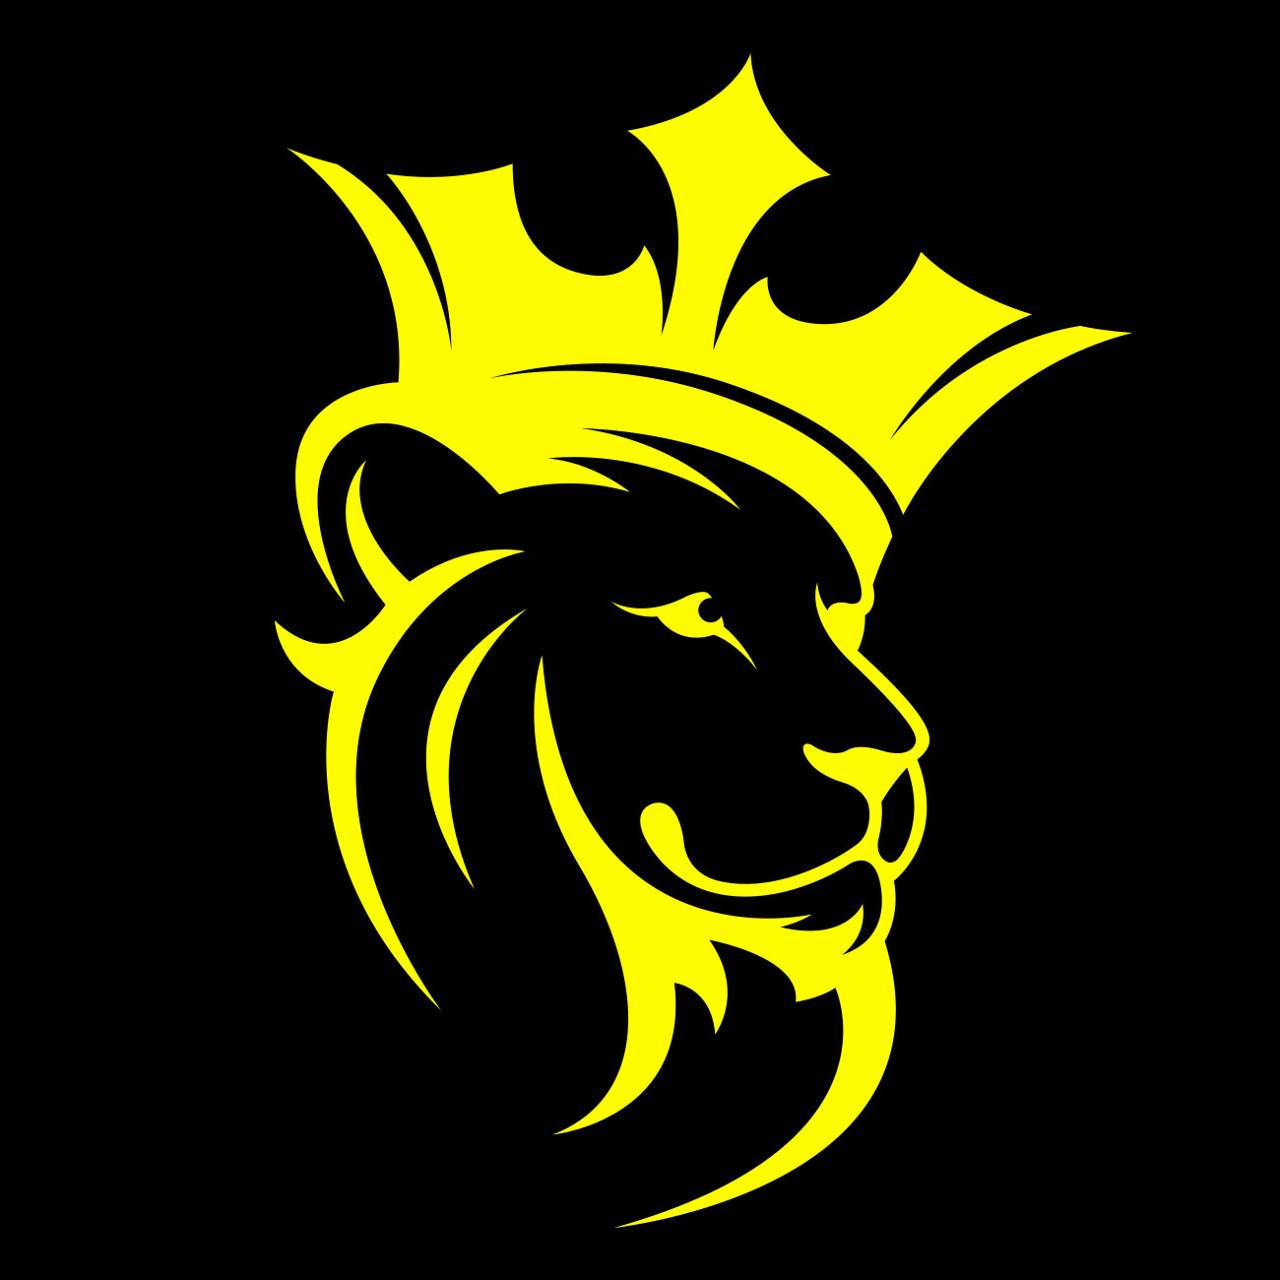 Cheery Lion Crowned King Logo Wallpaper